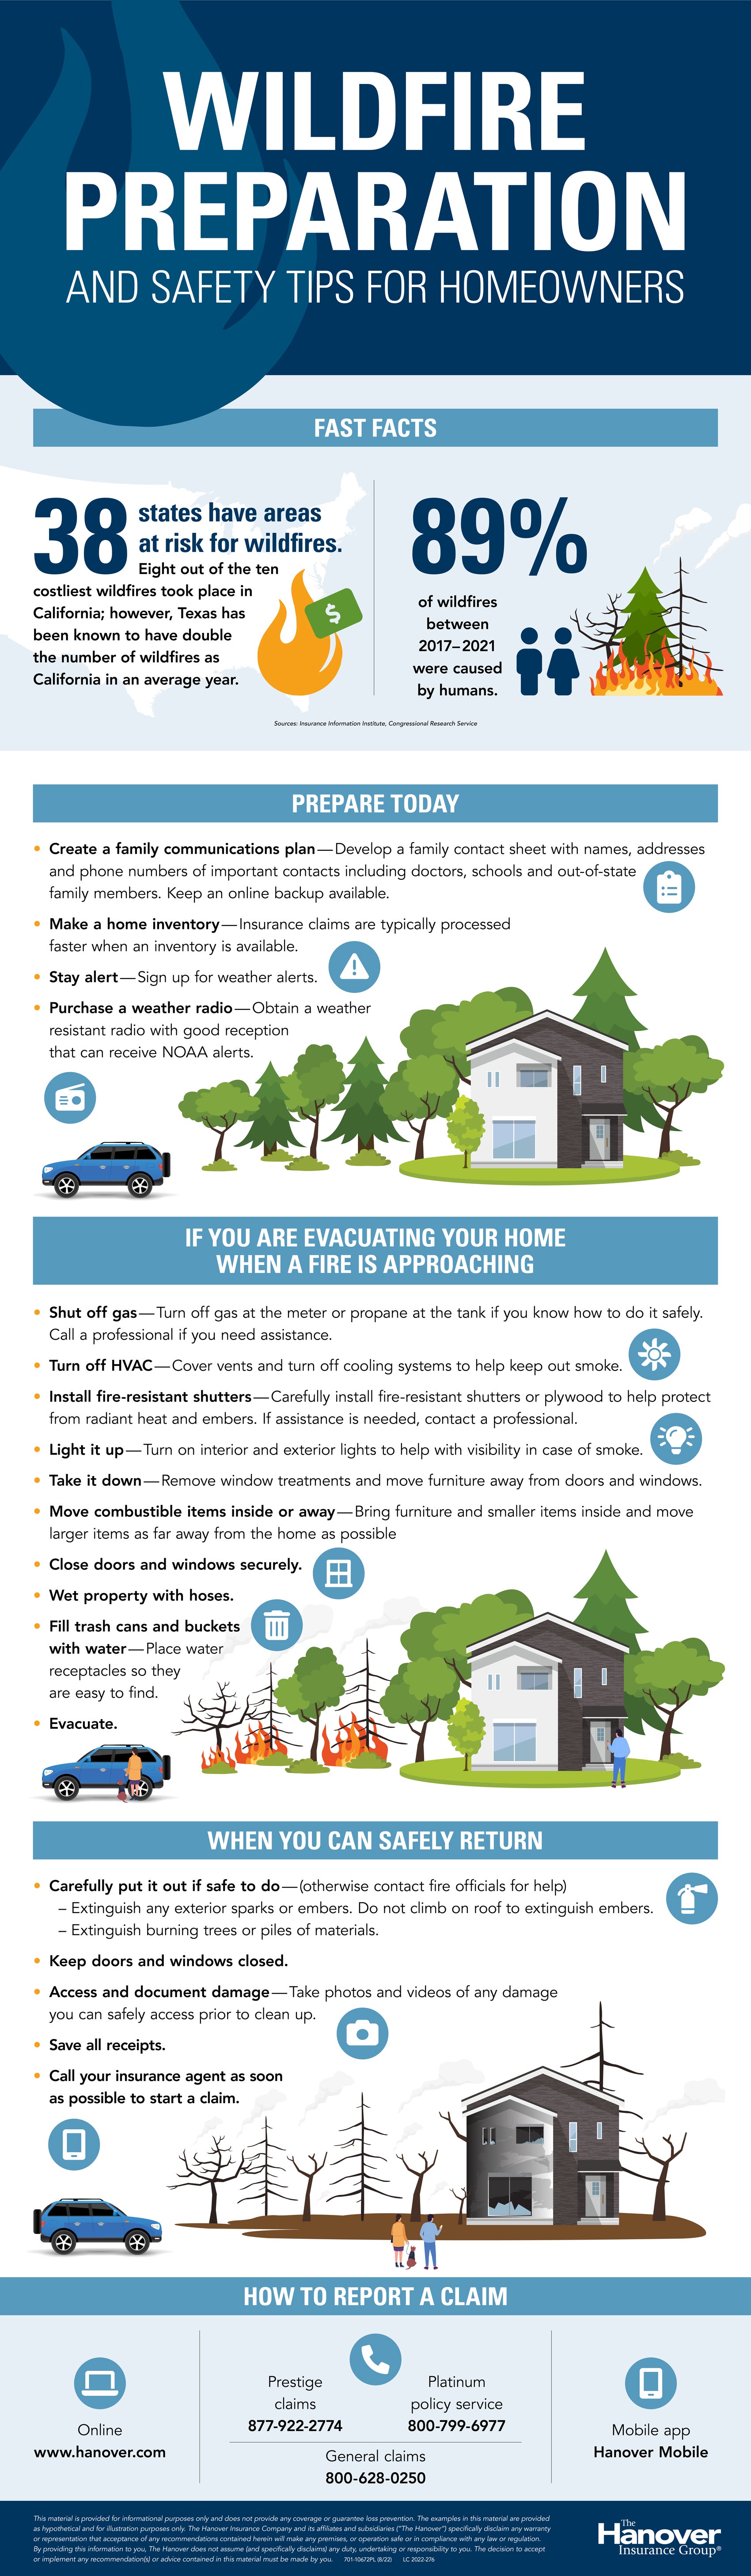 Infographic with homeowner tips for what to do before, during and after a wildfire.